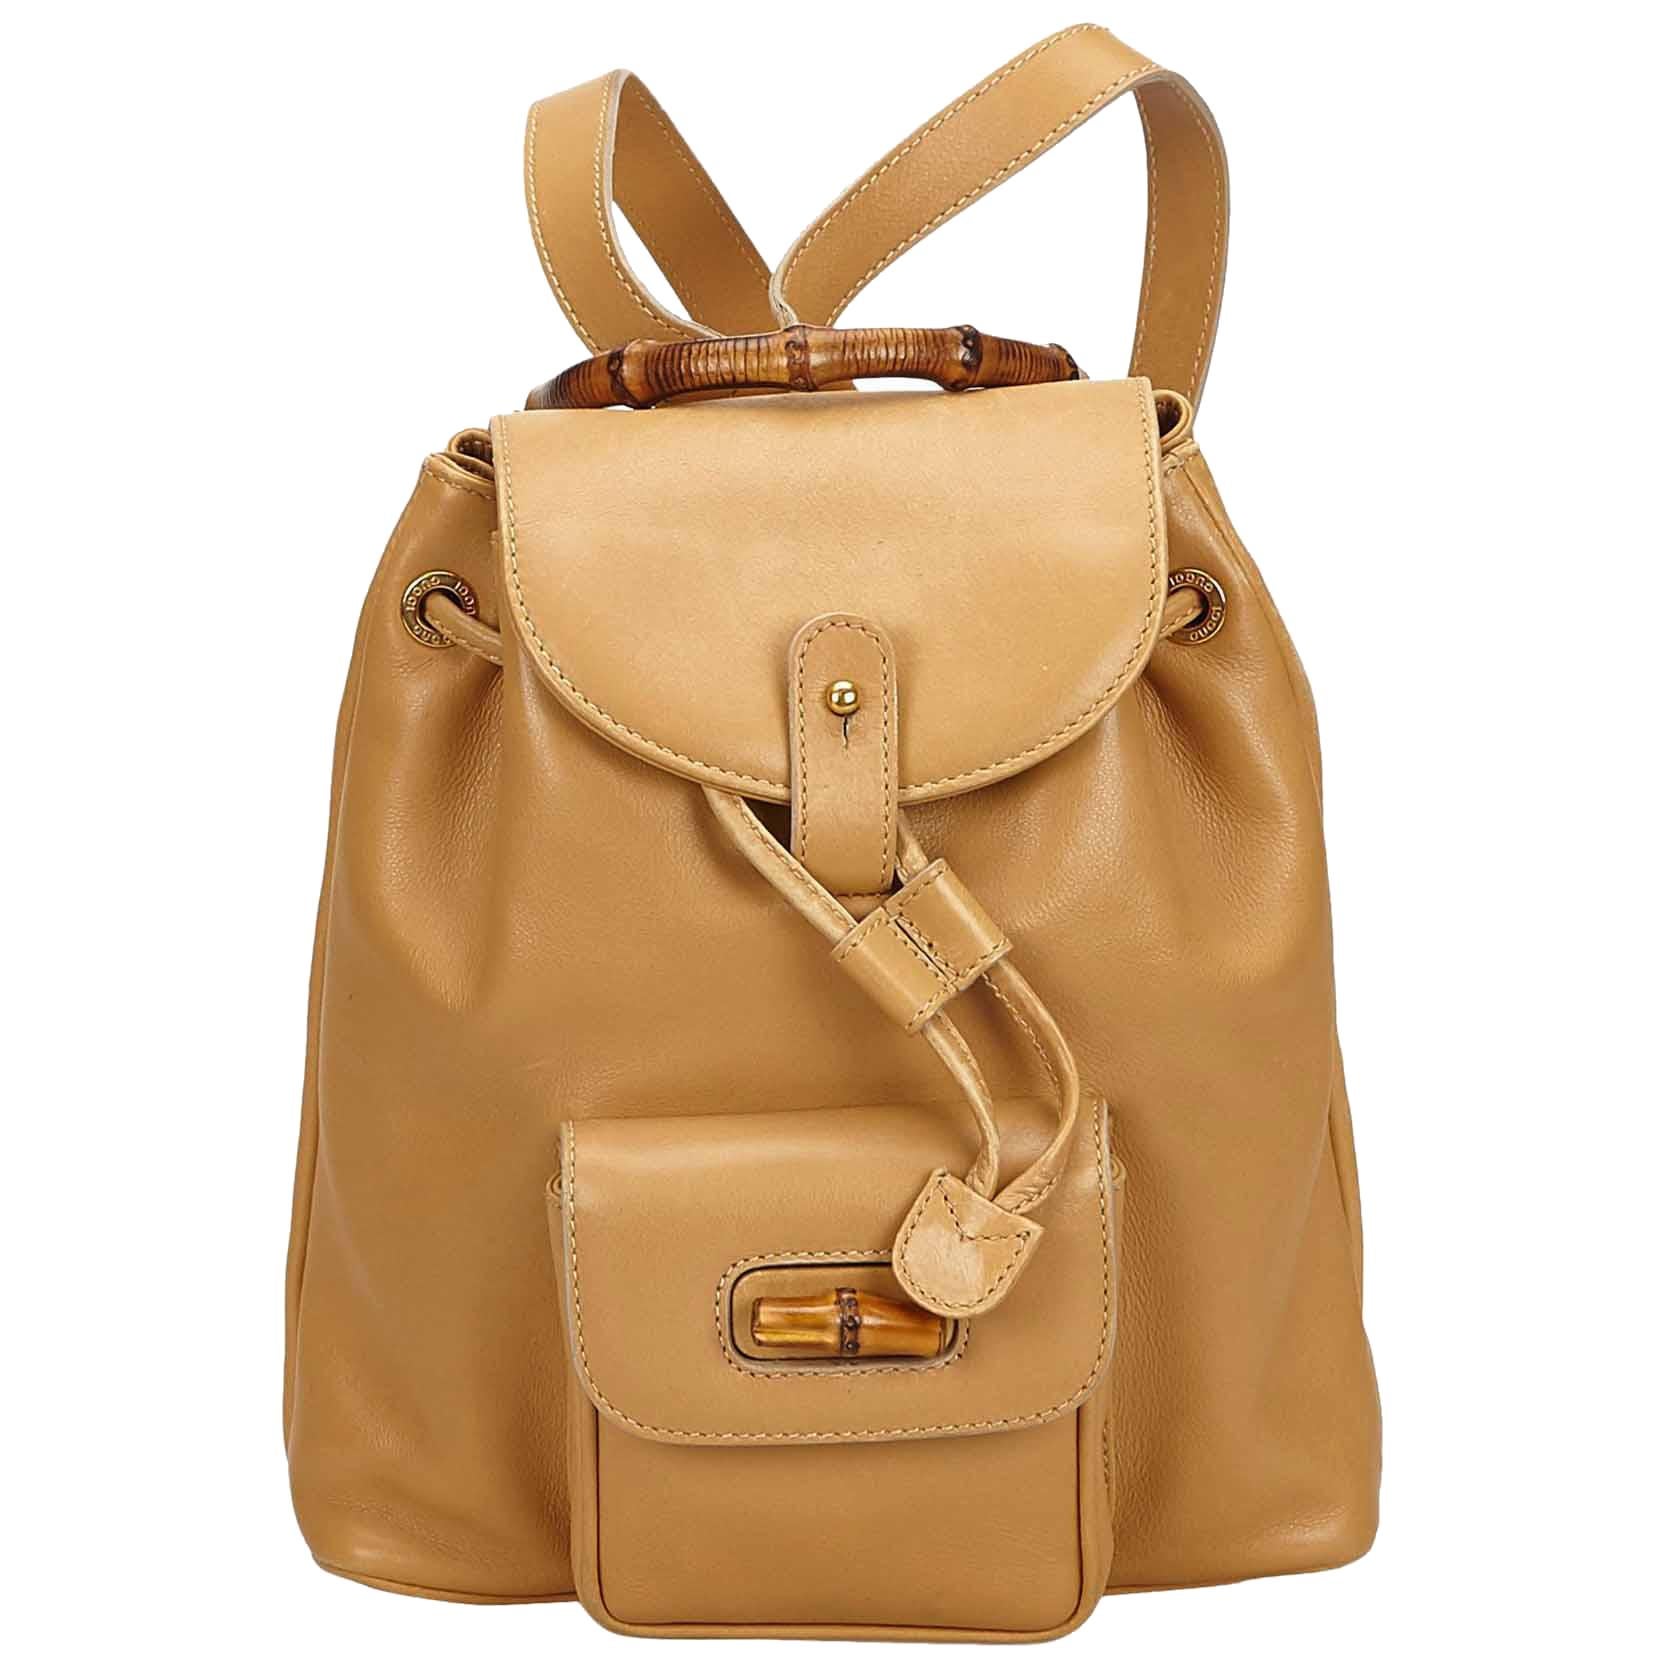 Gucci Beige Bamboo Calf Leather Drawstring Backpack